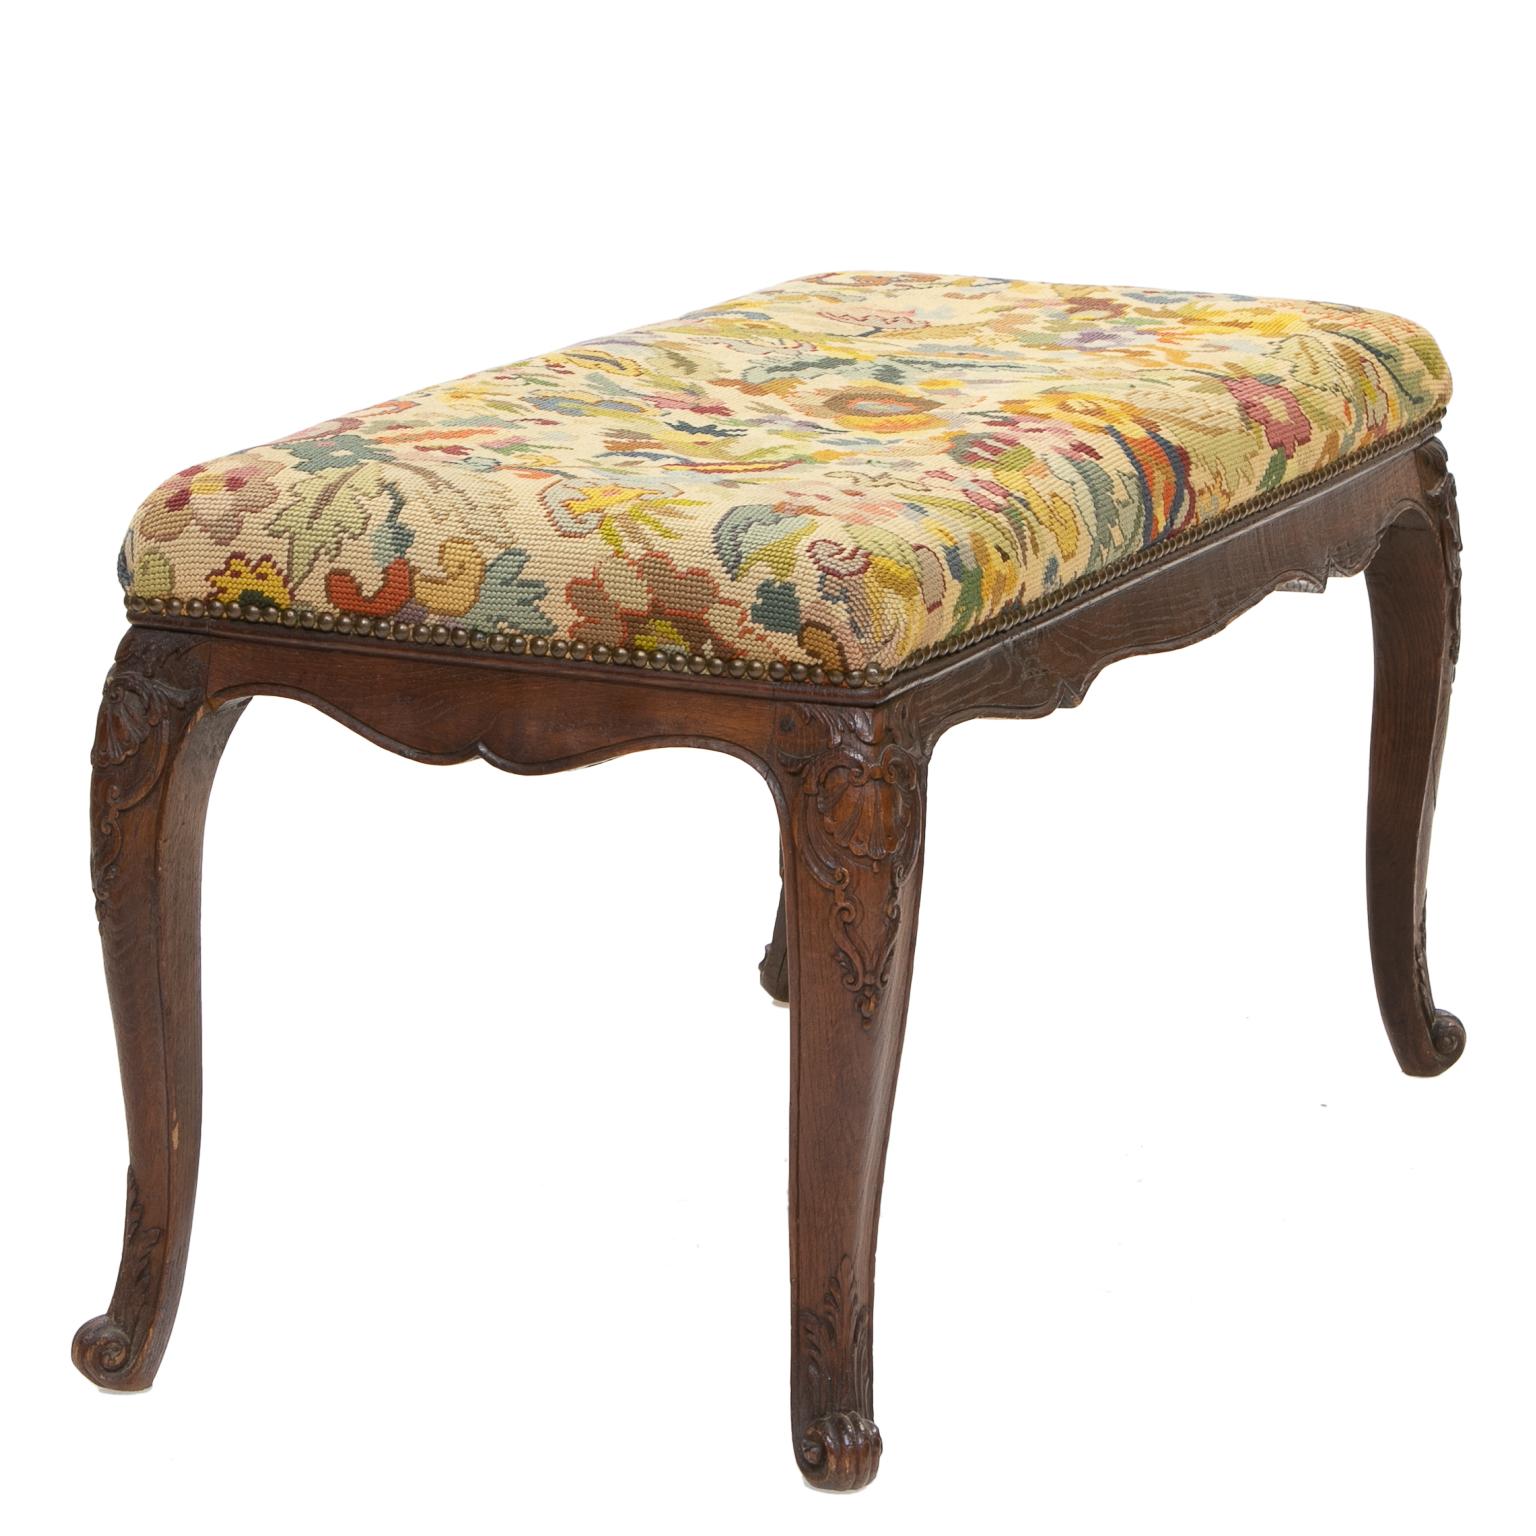 19th century French needlepoint tapestry bench

This bench is made of oakwood and from the Normandy region of France. Made in the late 19th century. A fantastic needlepoint covering applied to the seat and is in very nice condition. There is an